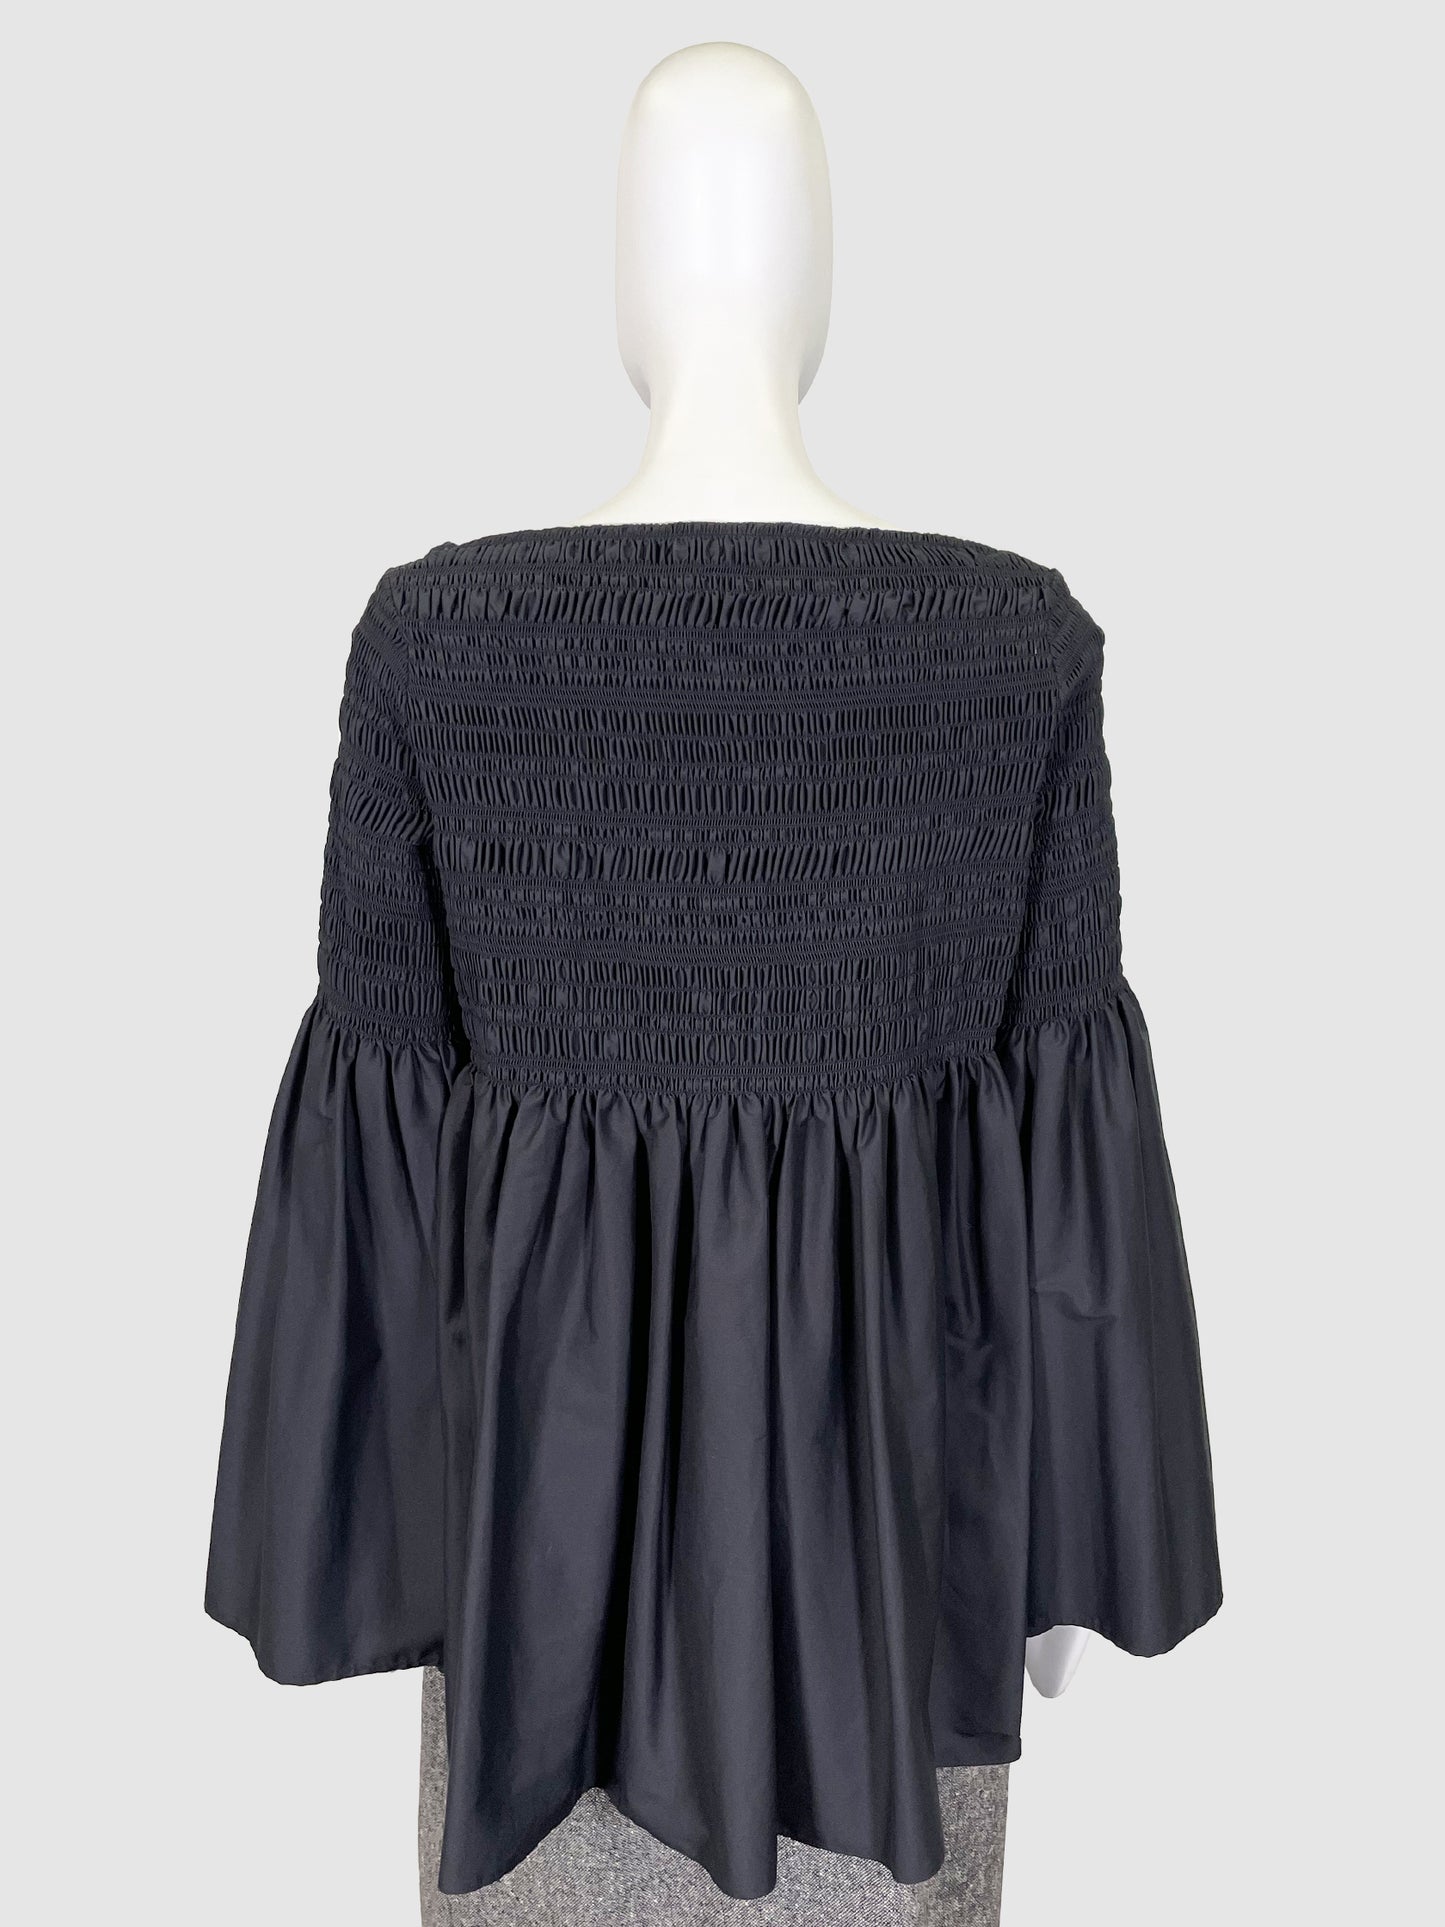 The Row Black Crinkled Top - Size S